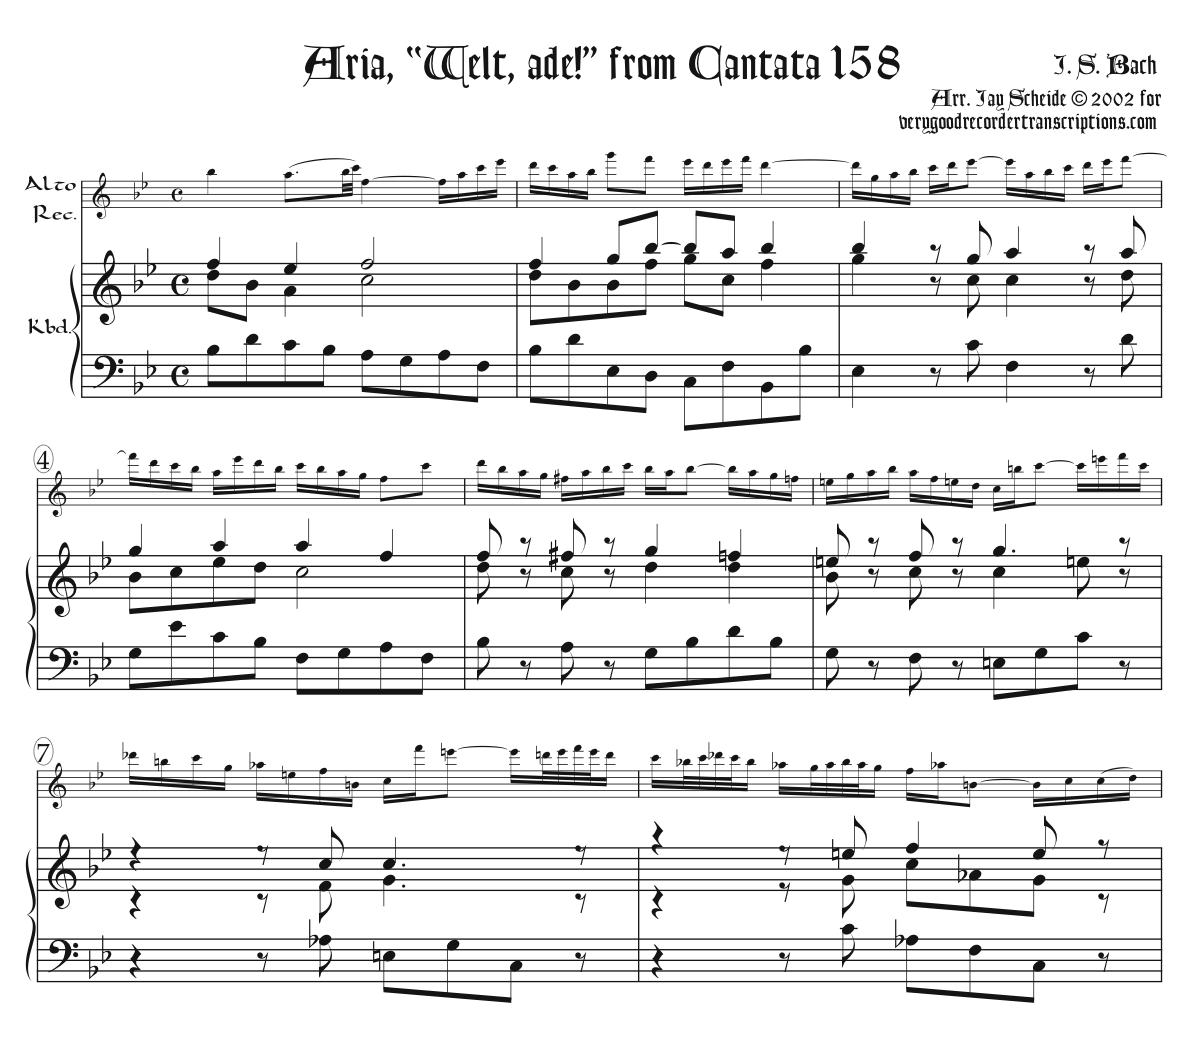 Aria with Chorale, “Welt, ade!”, from Cantata 158